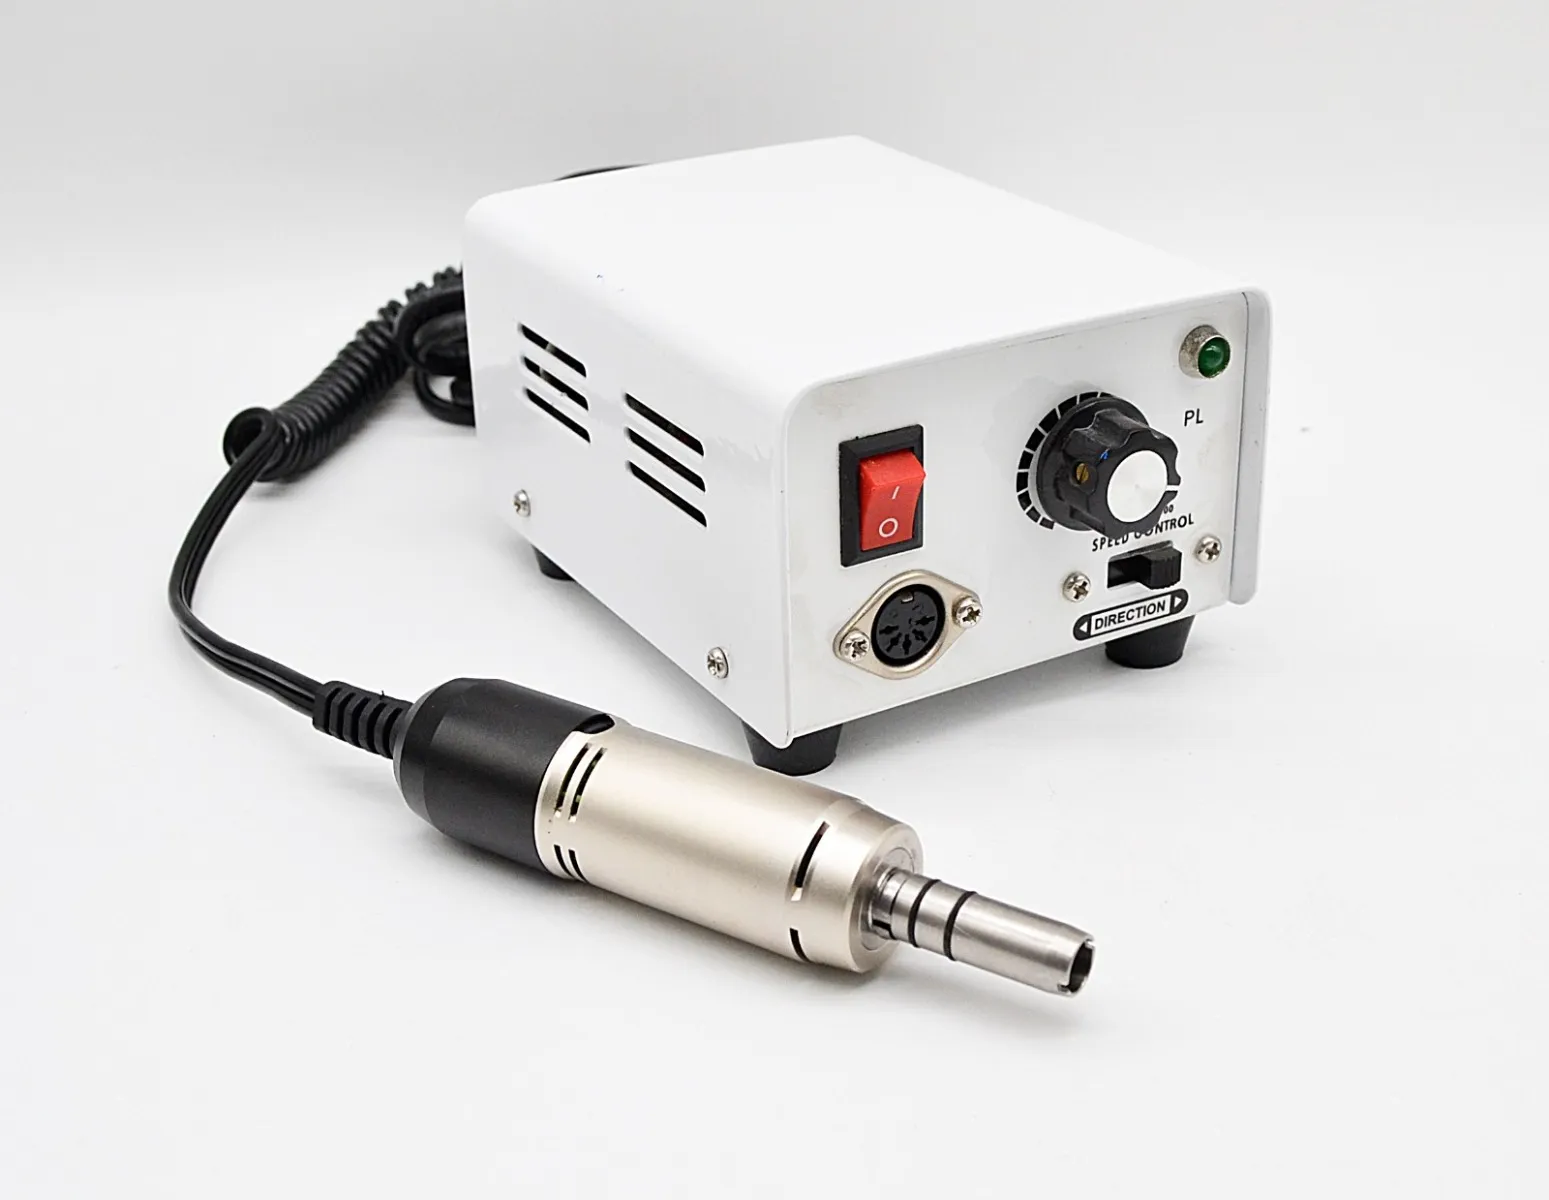 Clinical Micromotor Dental Micro Motor at Rs 3850/piece in Raipur